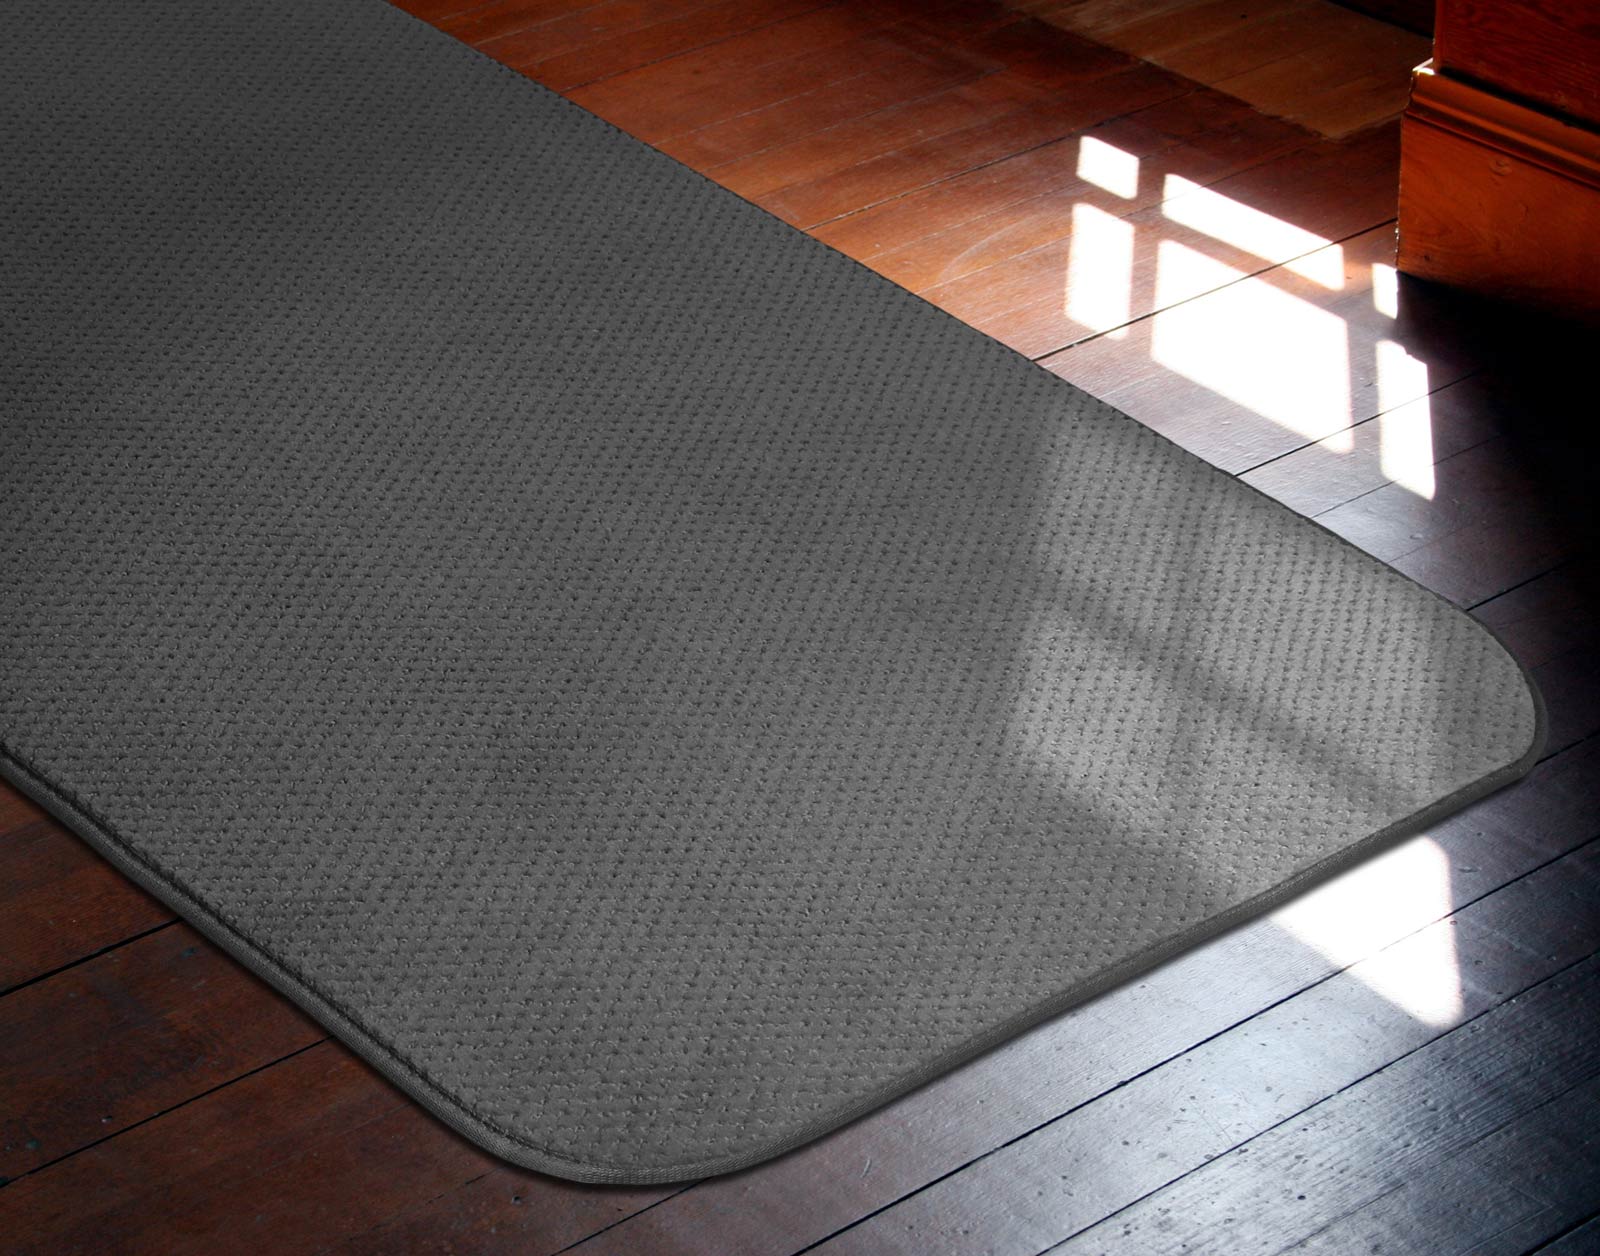 House, Home and More Skid-resistant Carpet Runner - Gray - 8 Ft. X 36 In.